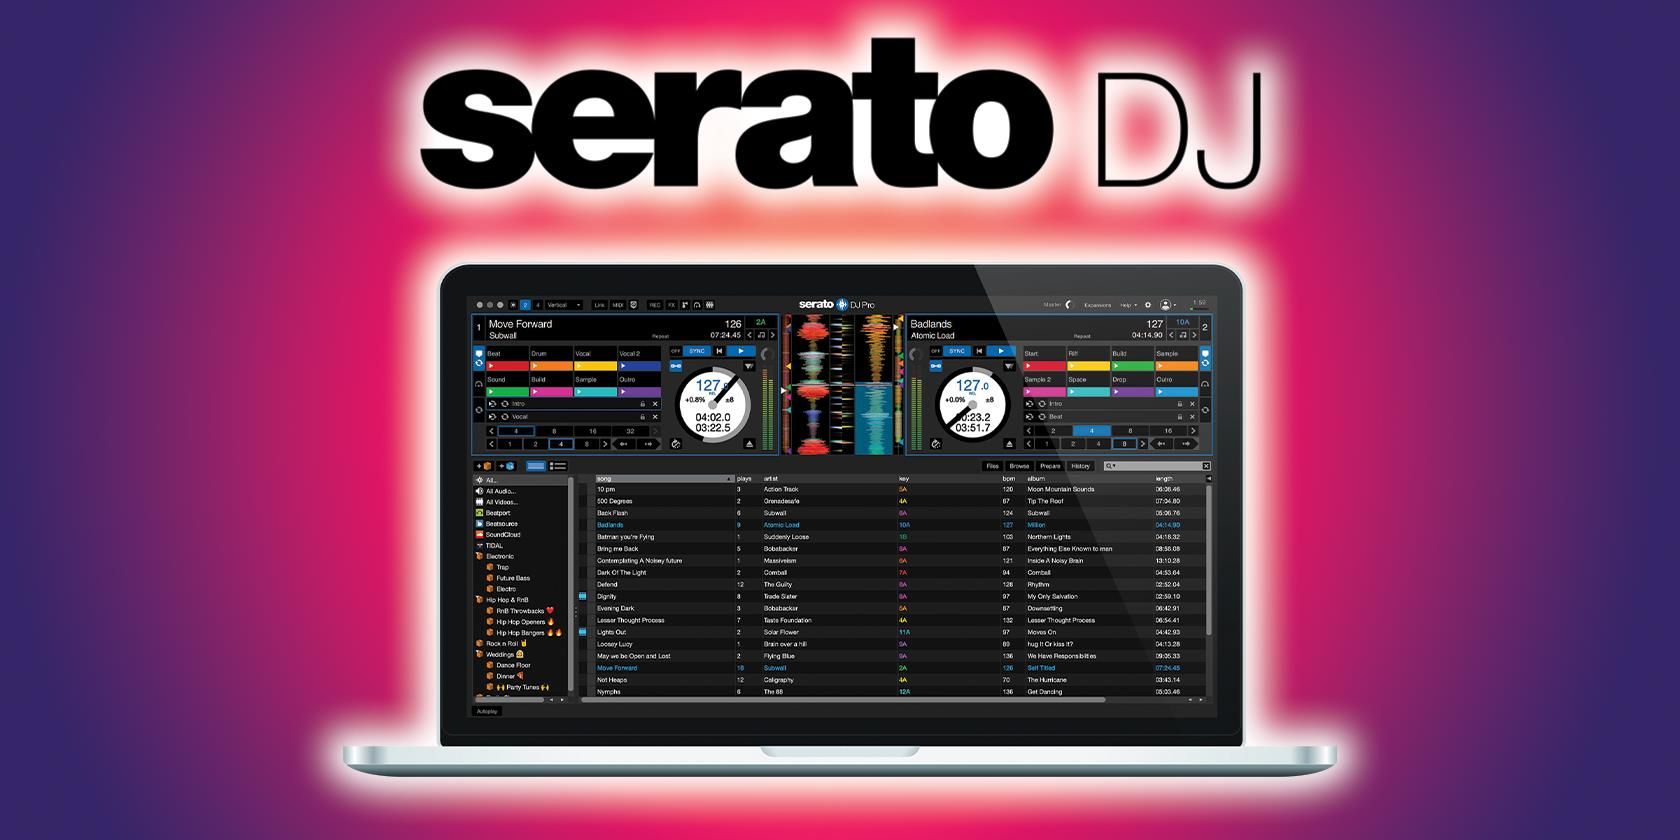 New Serato Dj Software Arrives With Support For M1 Macs And Big Sur